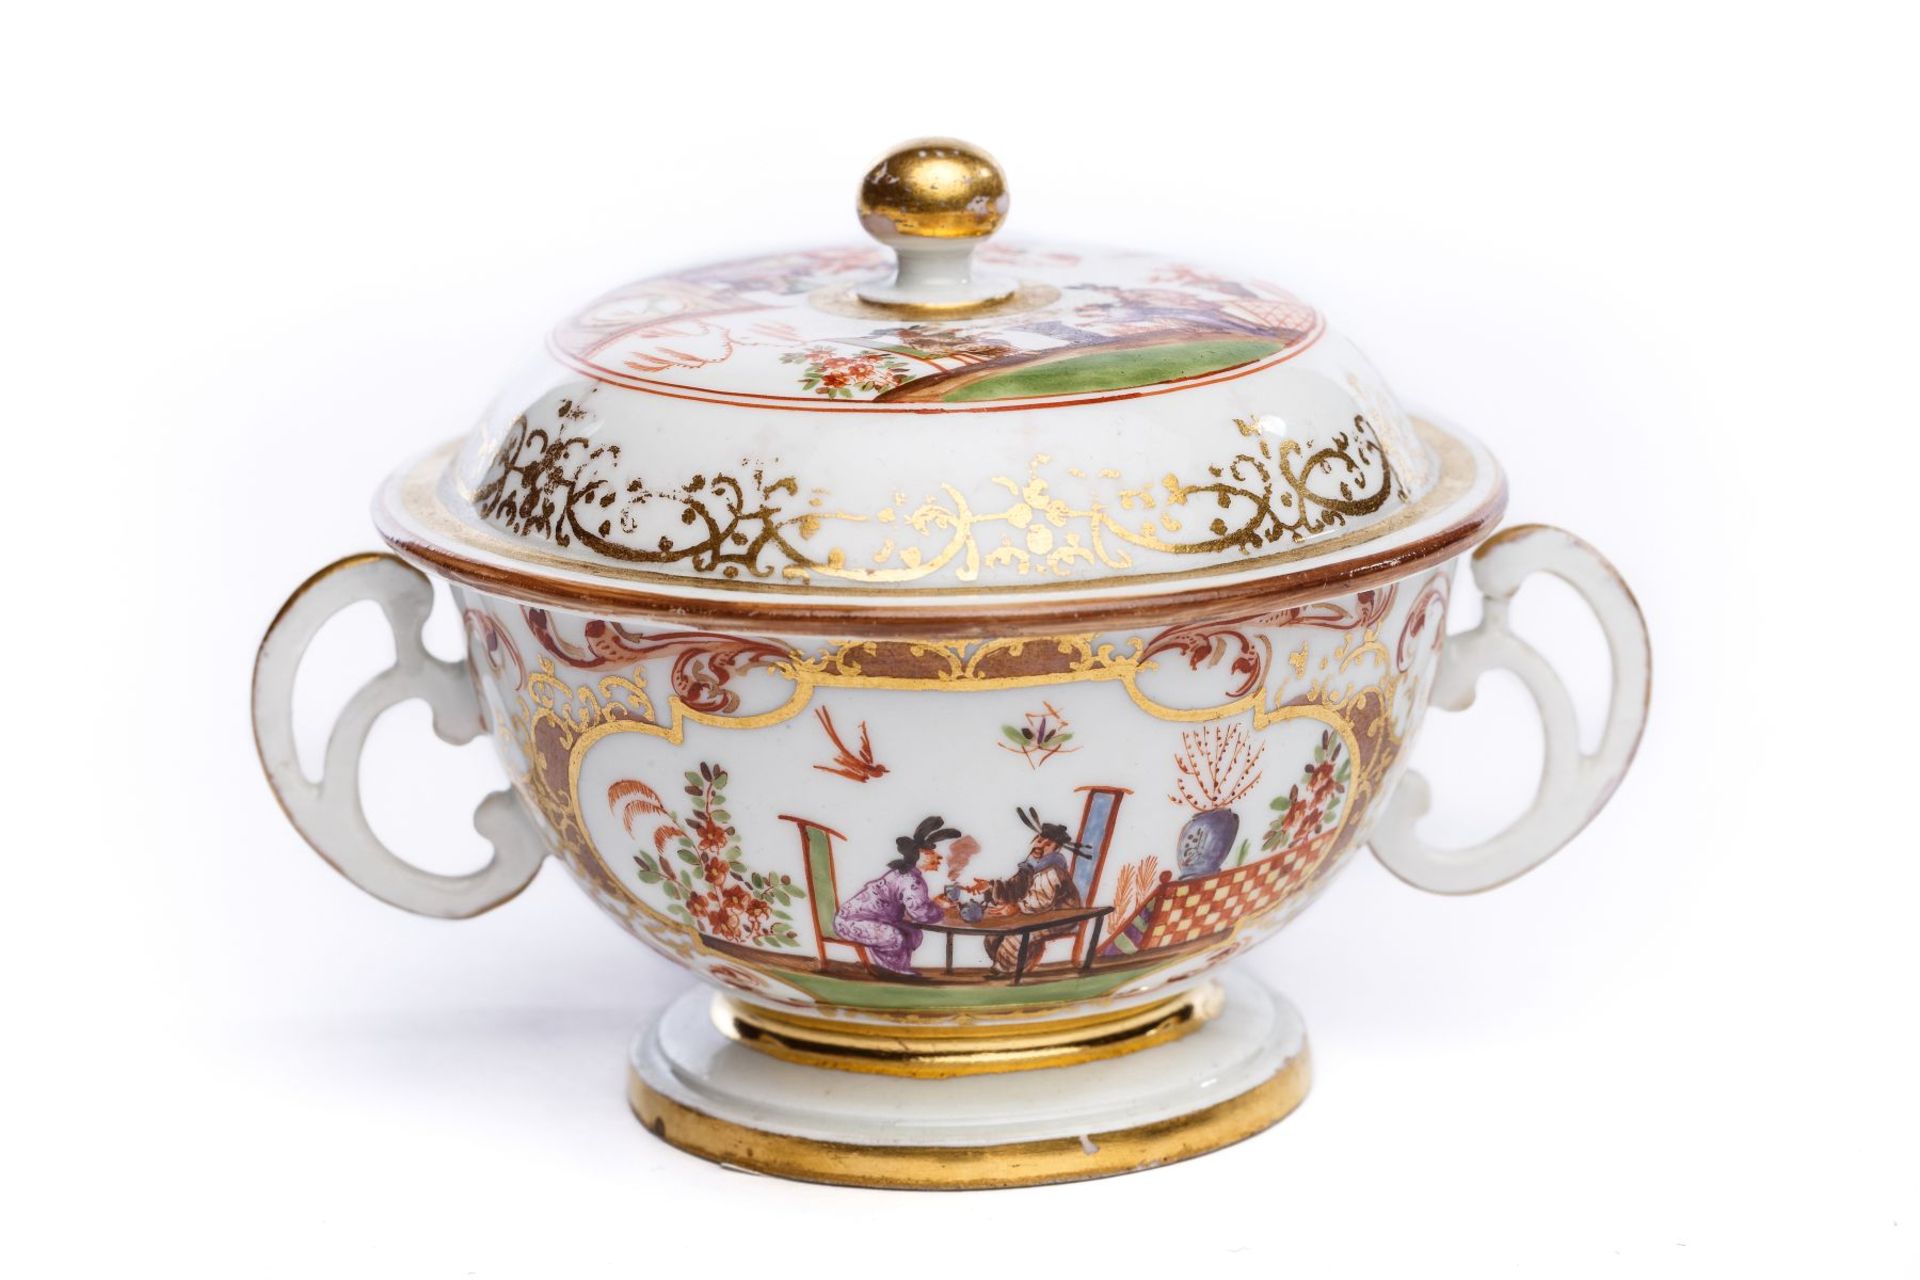 Small, two-handled tureen with lid, Meissen 1725